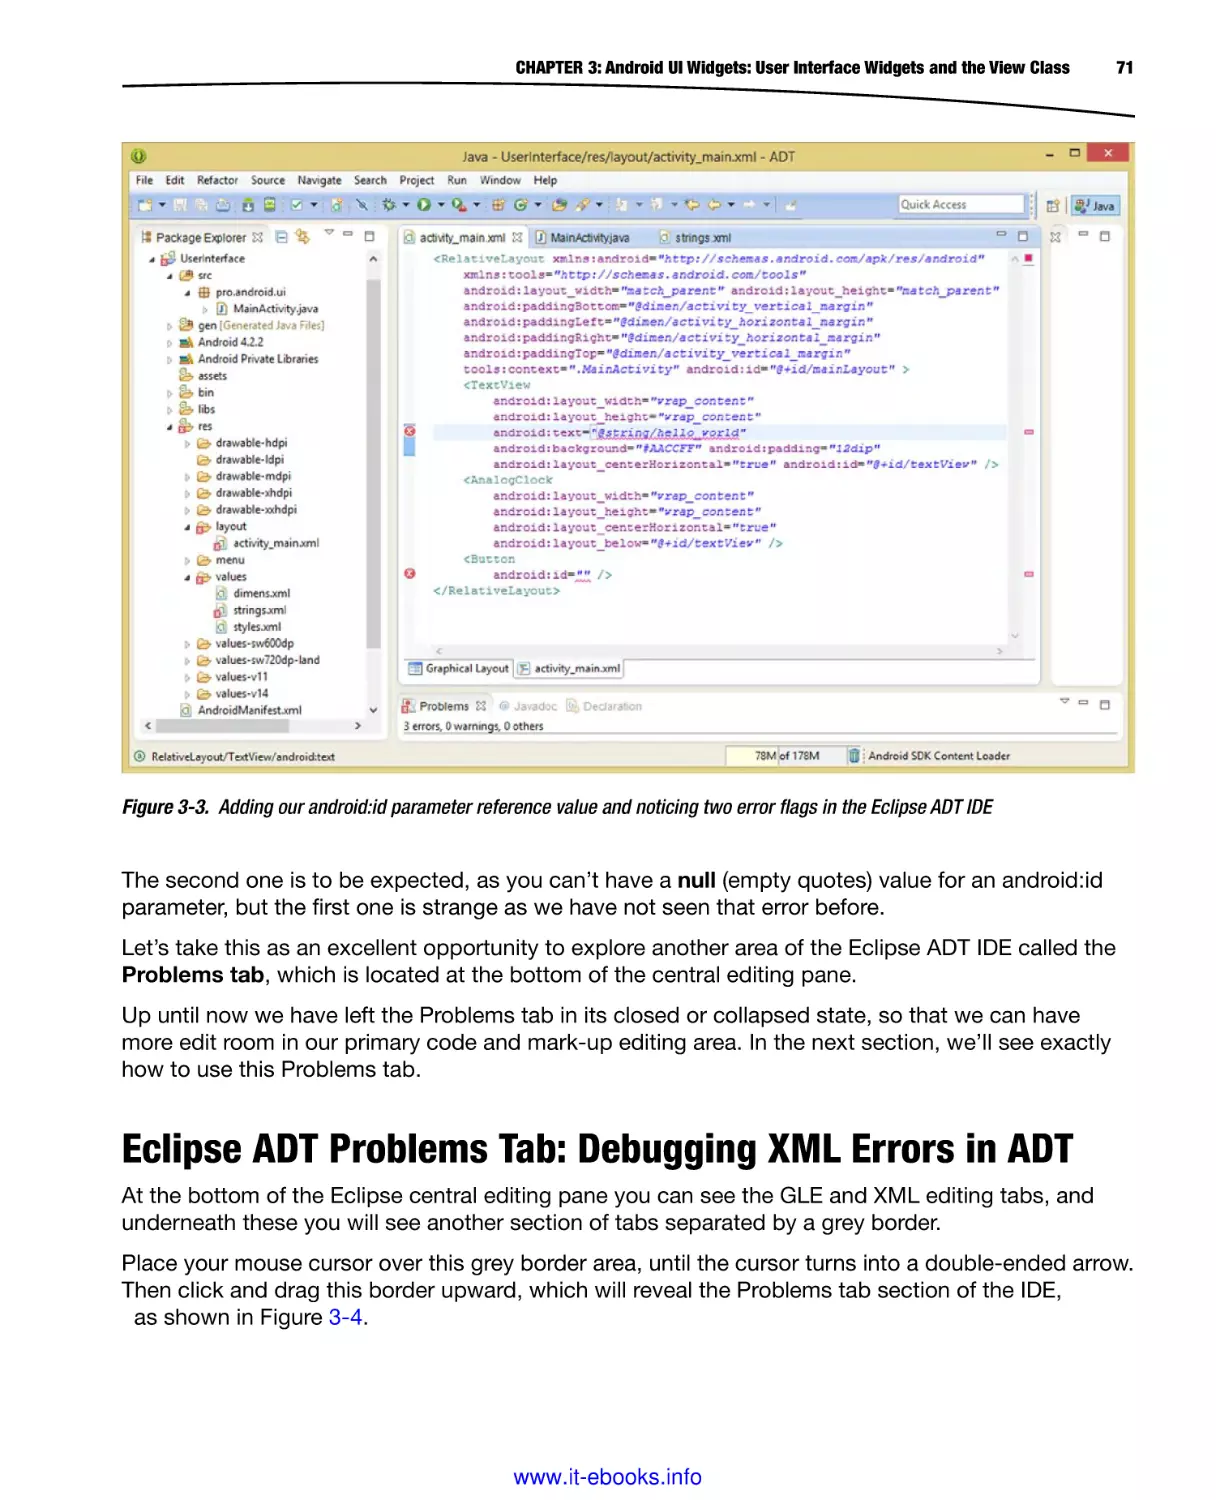 Eclipse ADT Problems Tab